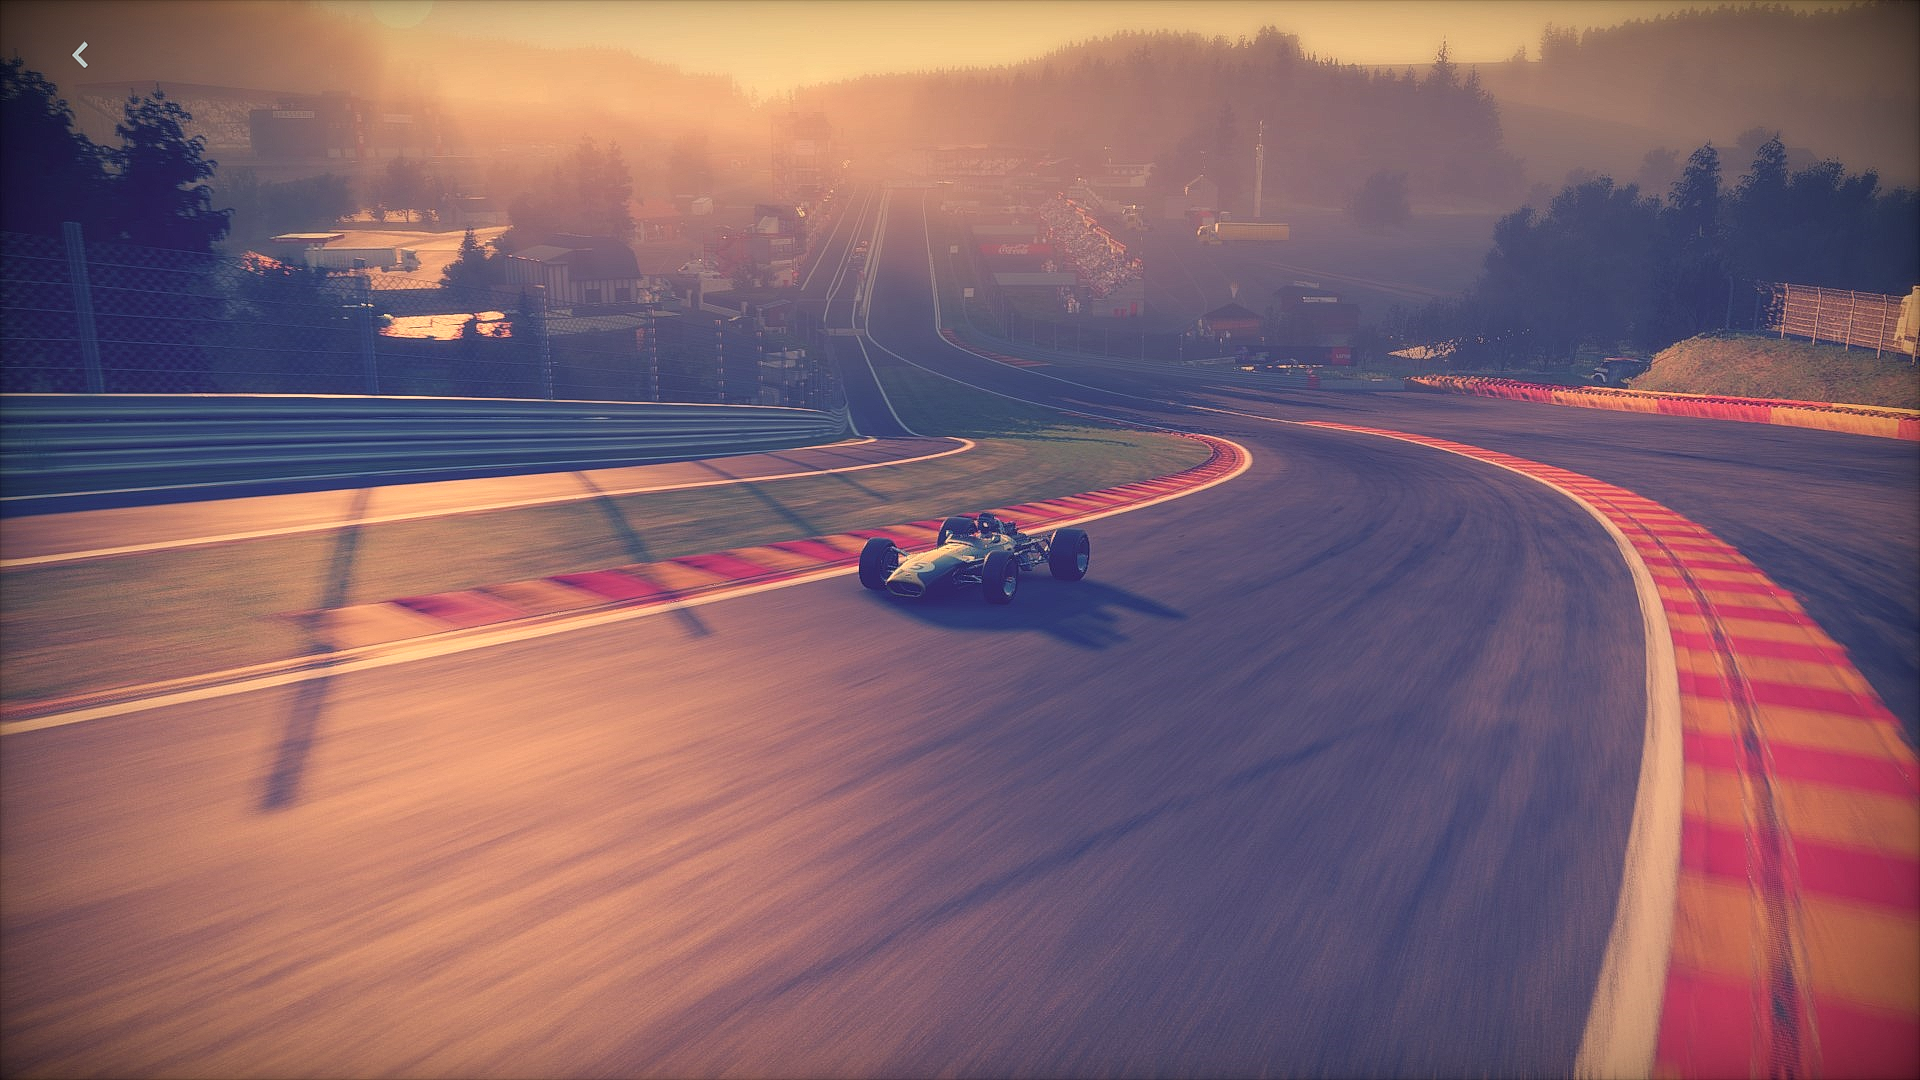 Spa Francorchamps 1968 Lotus 49 Project Cars Race Tracks Video Games 1920x1080